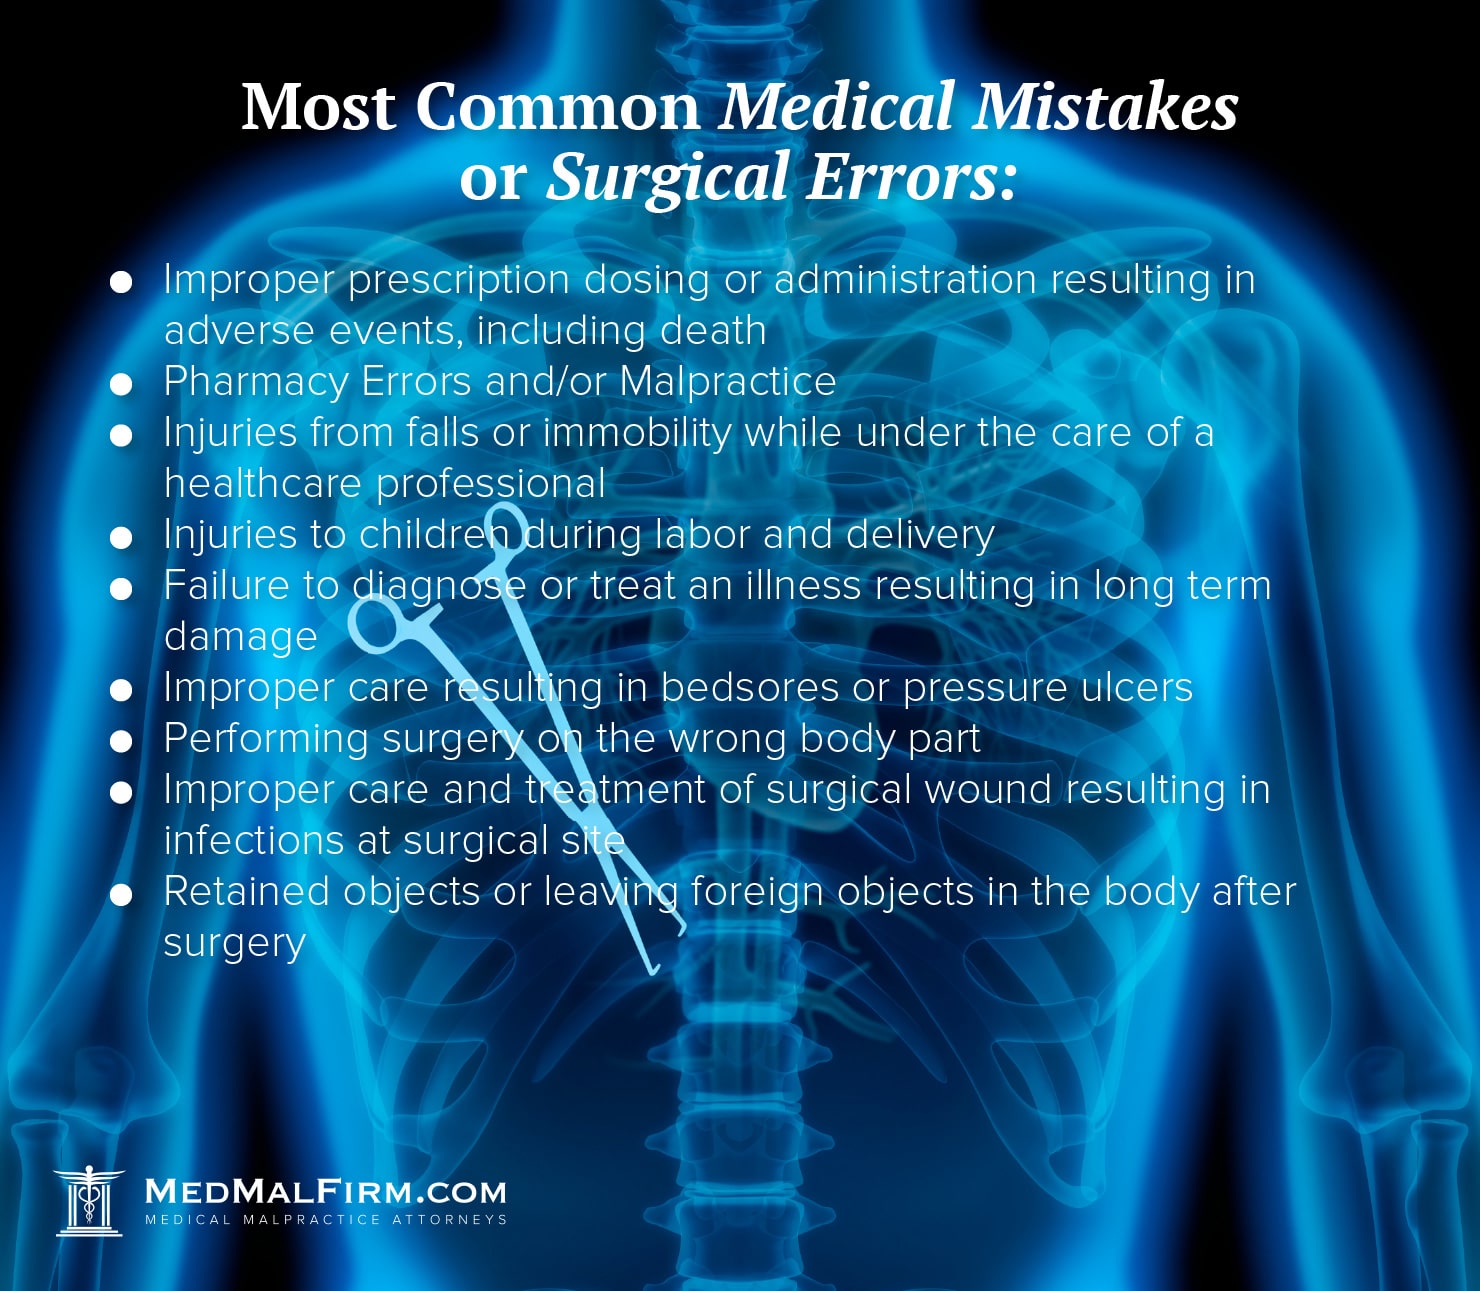 Most Common Medical Mistakes or Surgical Errors